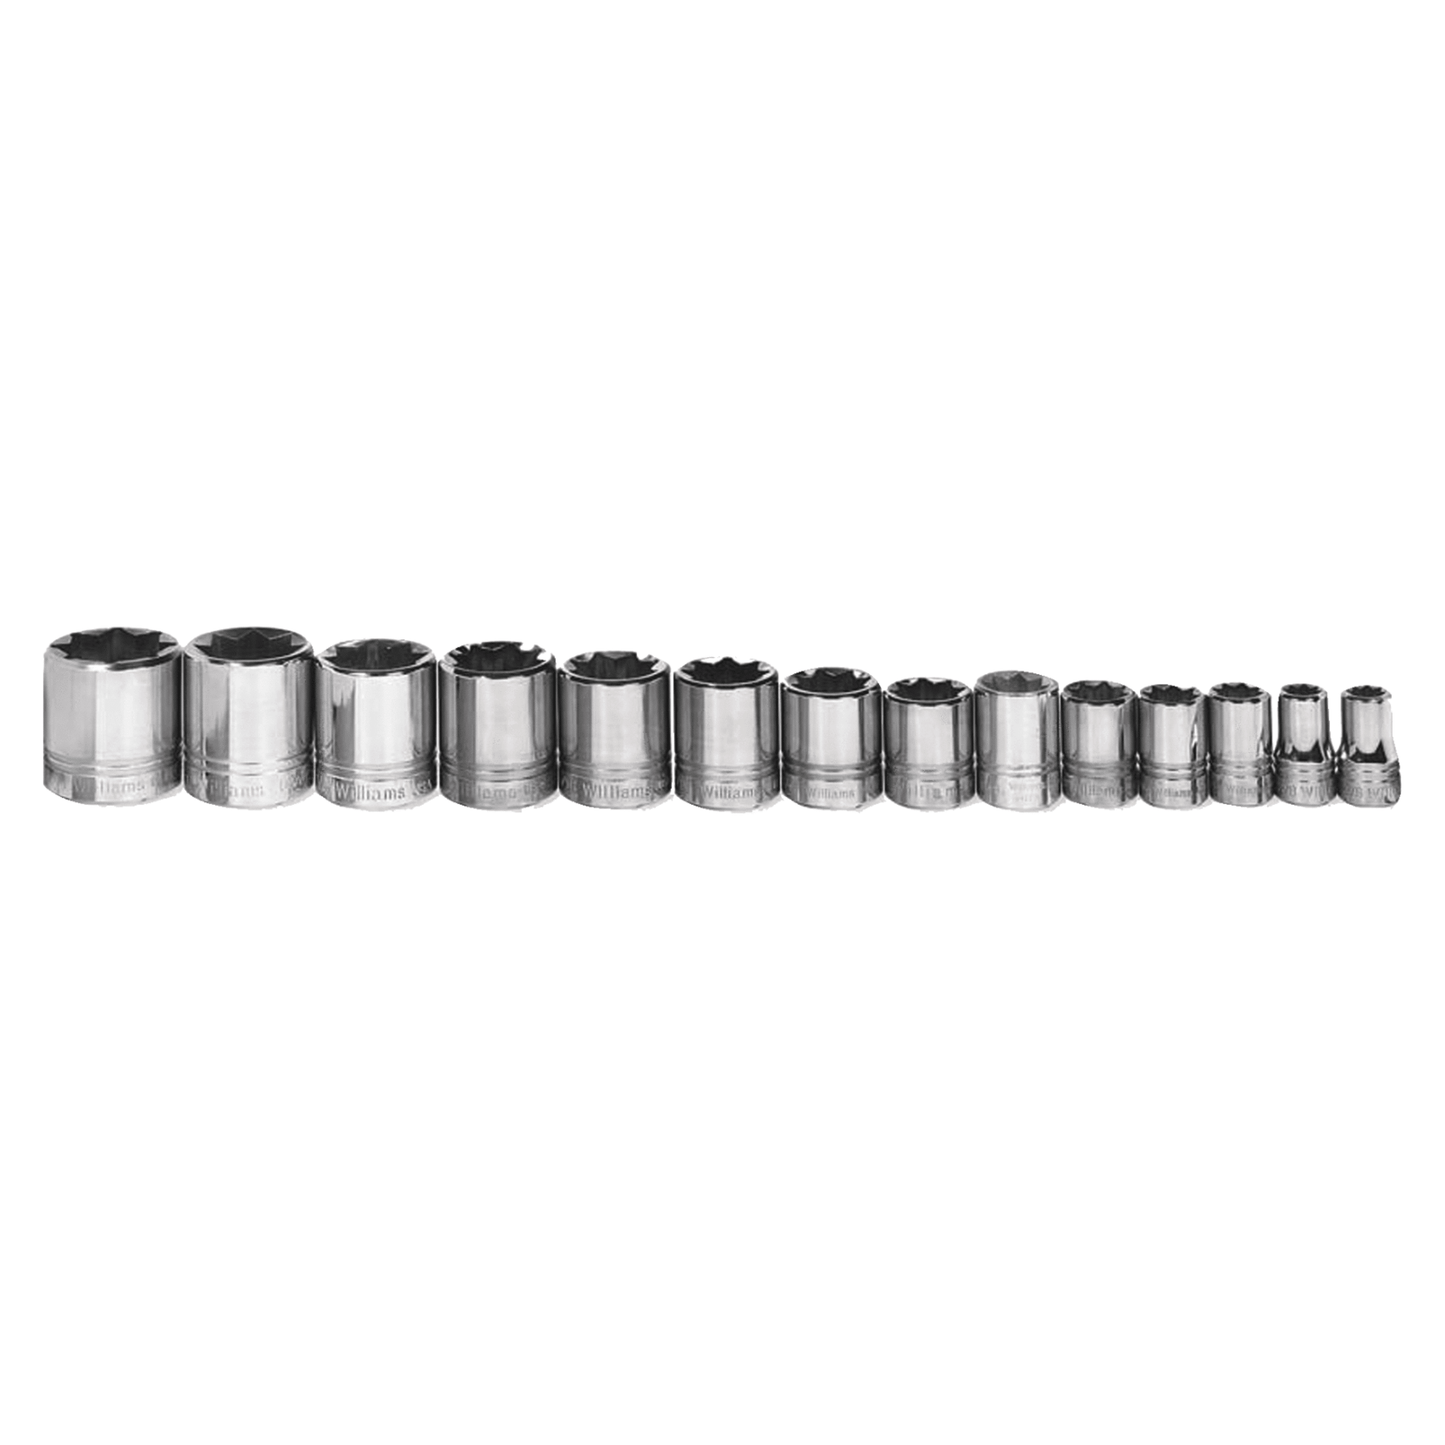 Williams WSS-814RC, 14pc 1/2" Drive 8-Point SAE Shallow Socket Set on Rail and Clips